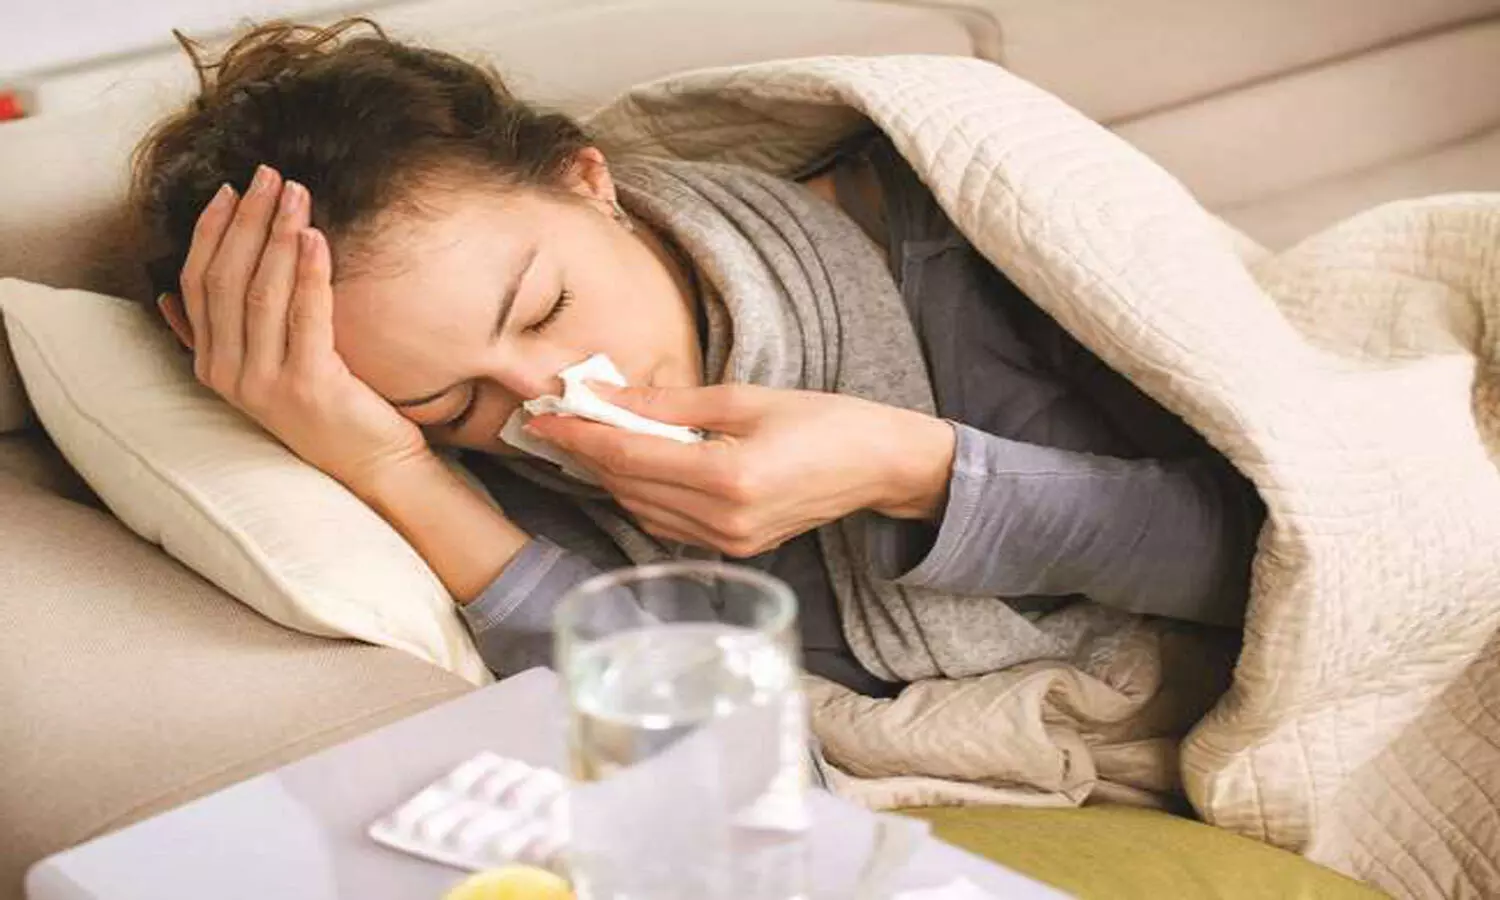 Reasons why you may keep catching cough & cold frequently